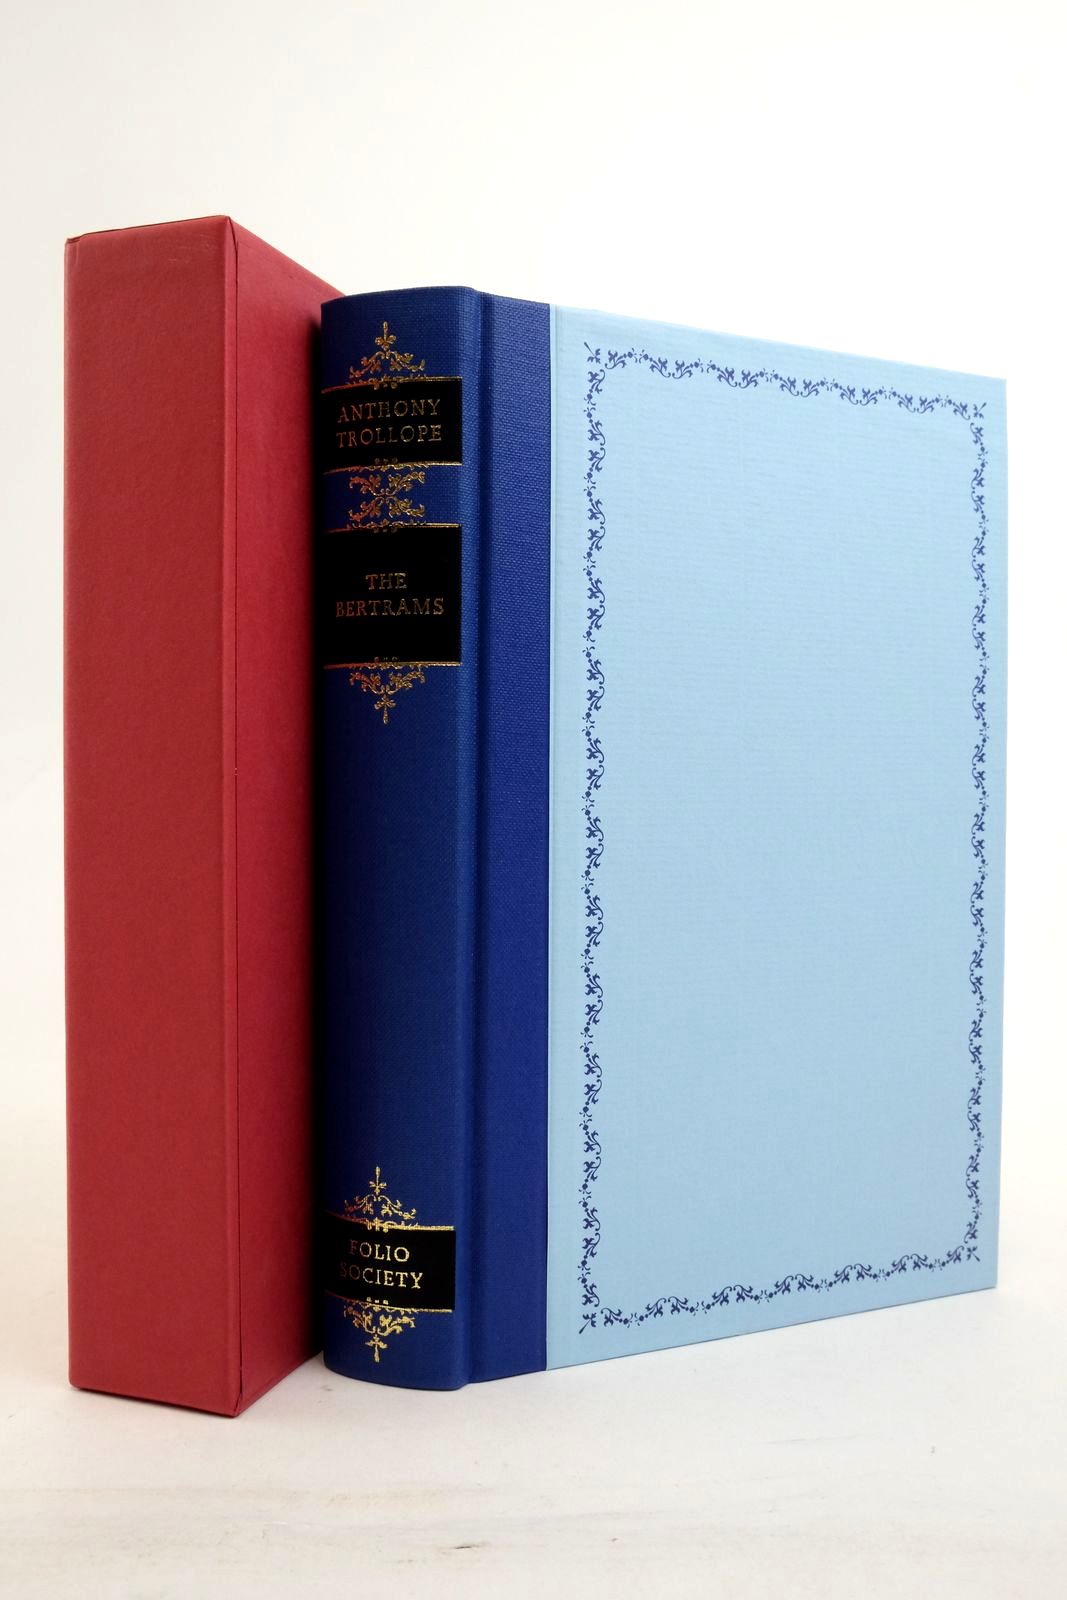 Photo of THE BERTRAMS written by Trollope, Anthony Skilton, David illustrated by Brookes, Peter published by Folio Society (STOCK CODE: 2138317)  for sale by Stella & Rose's Books